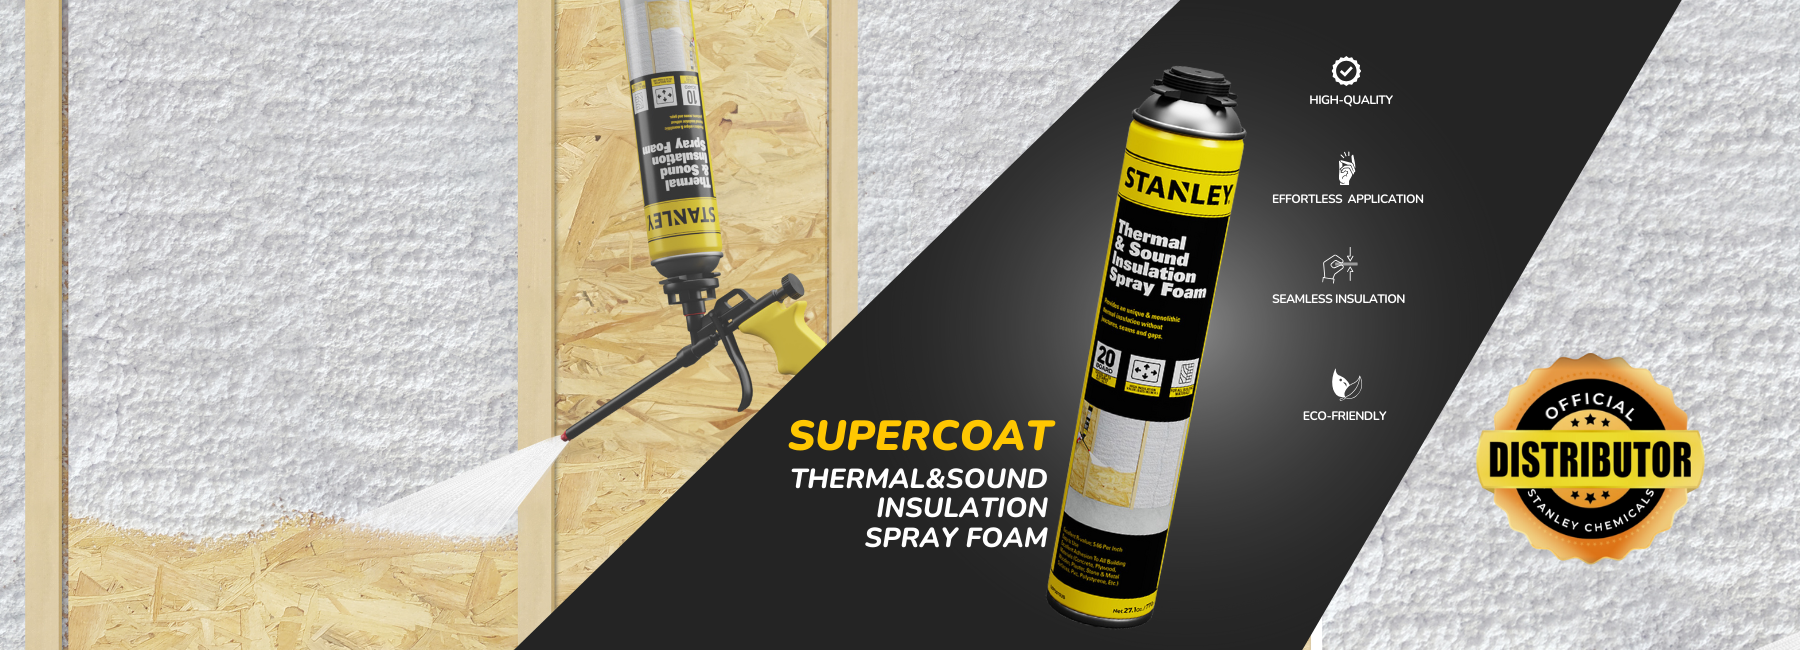 Stanley Supercoat Thermal & Sound Insulation Spray Foam Official Distributer 2